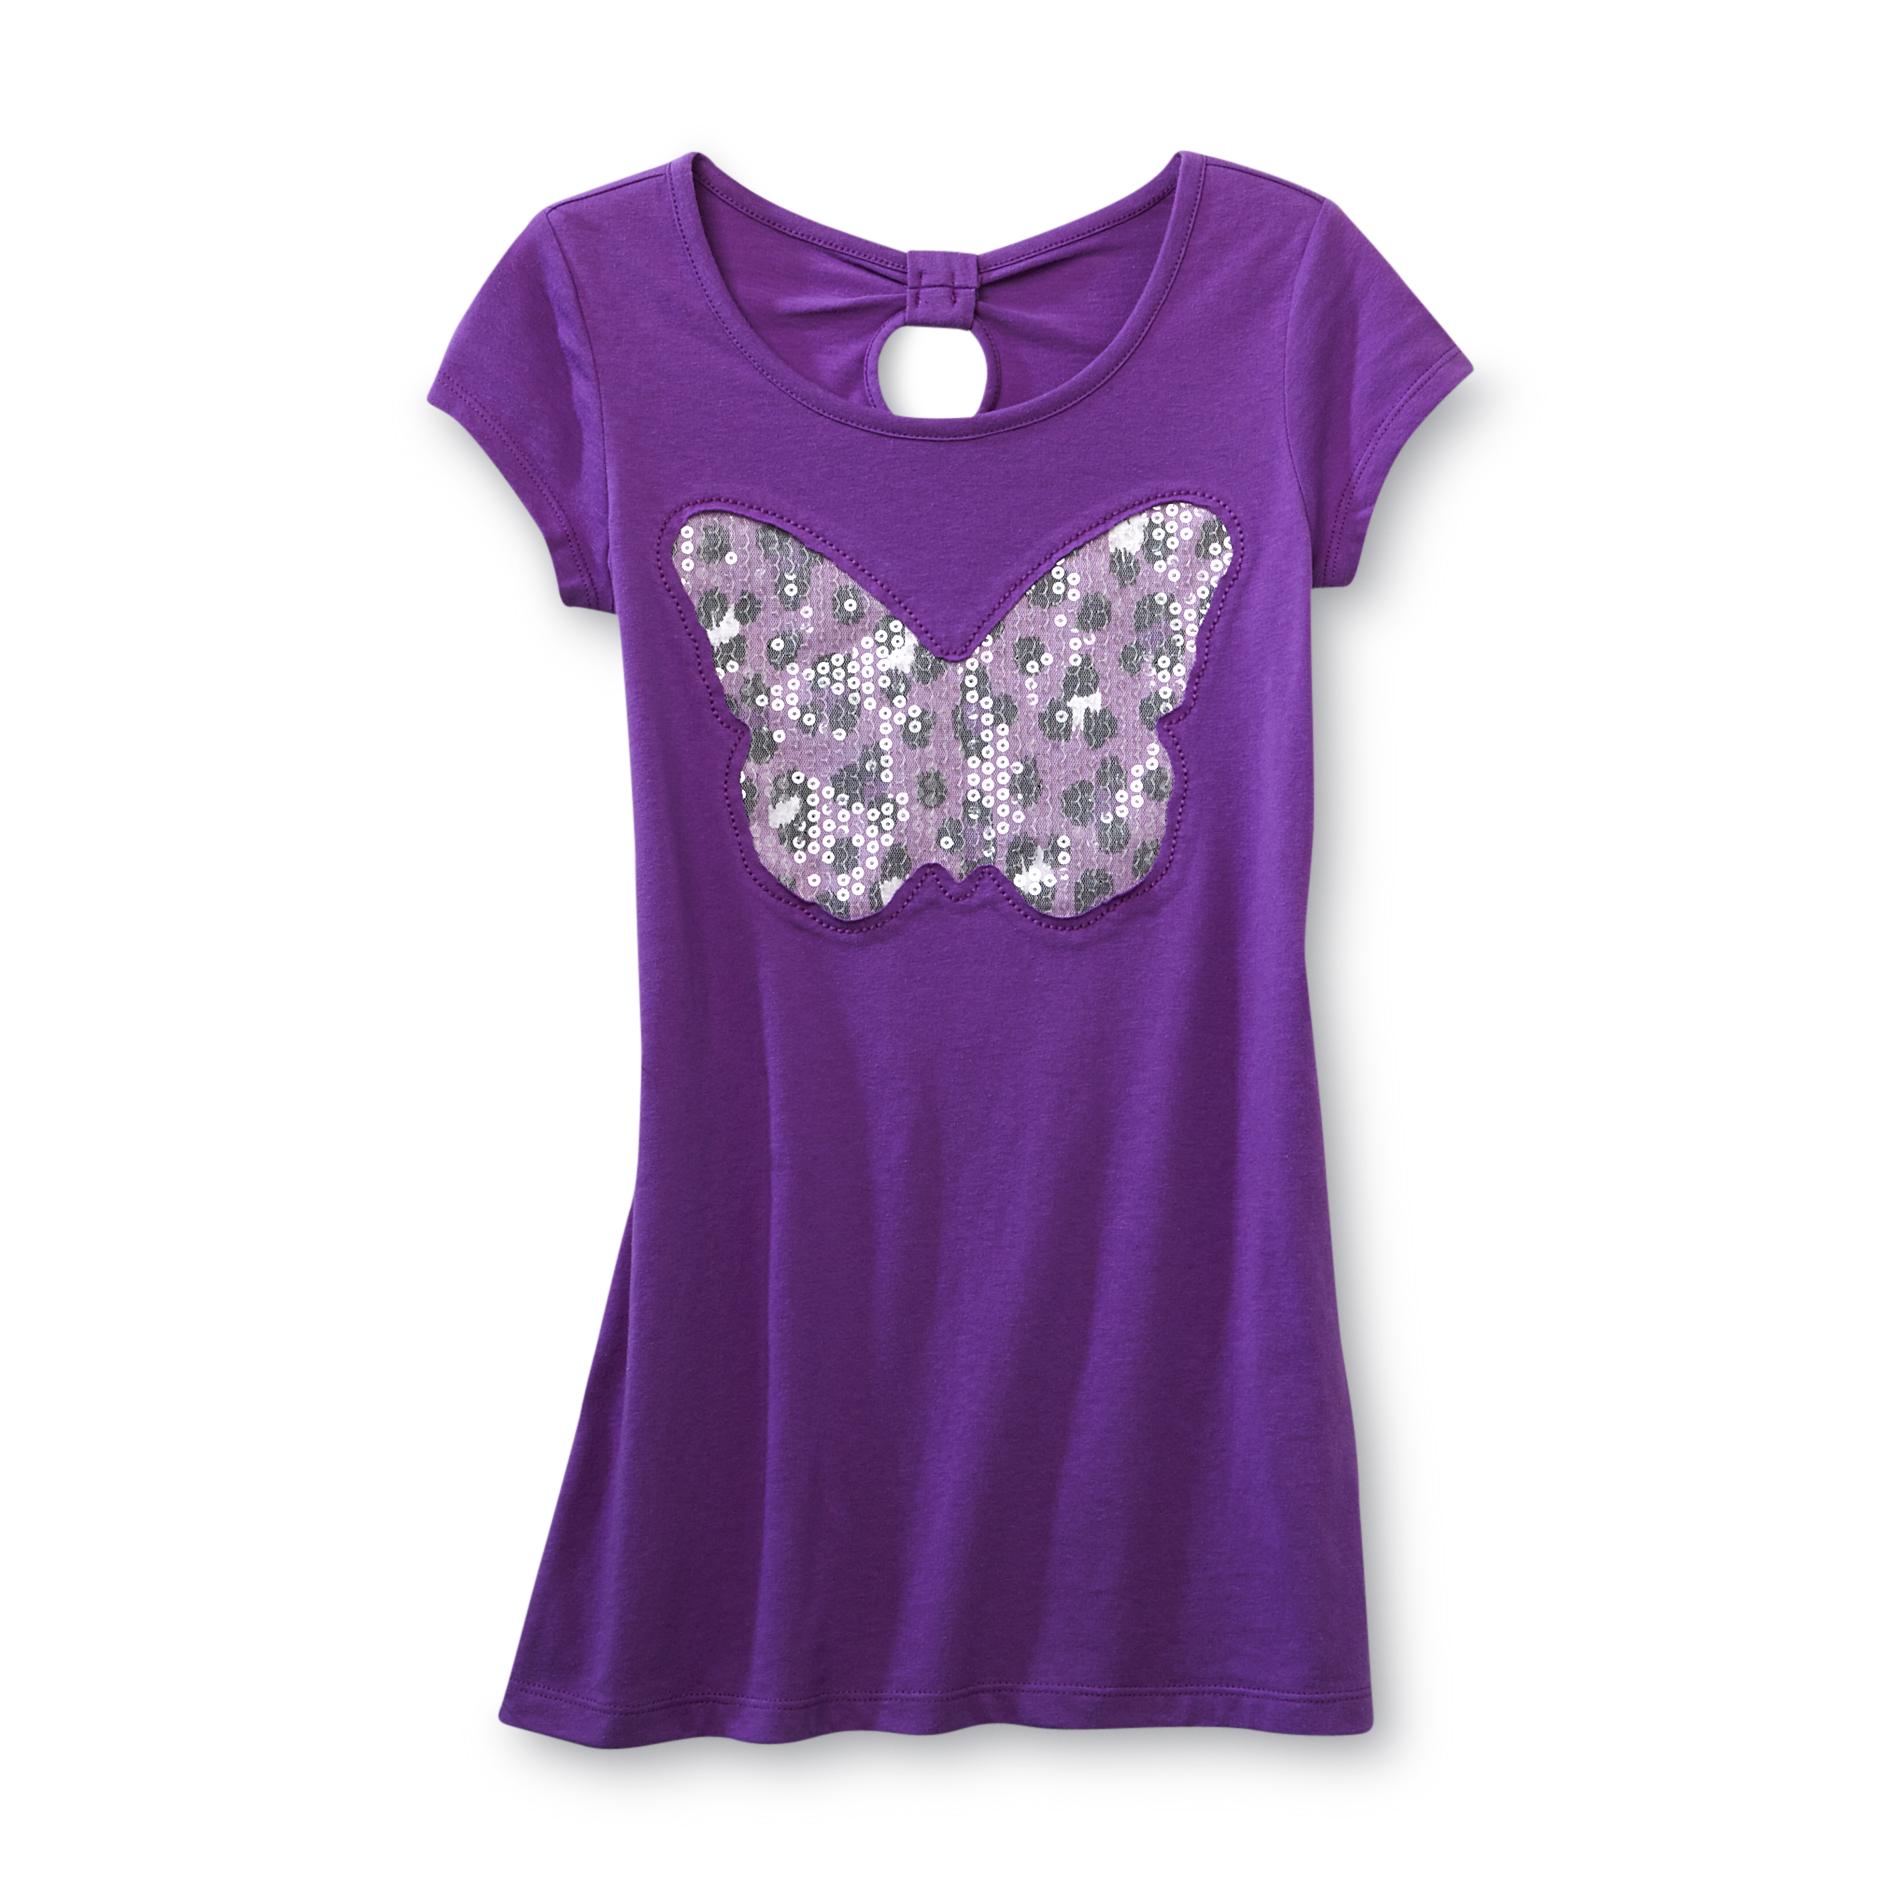 Basic Editions Girl's Scoop Neck T-shirt  - Animal Print & Butterfly